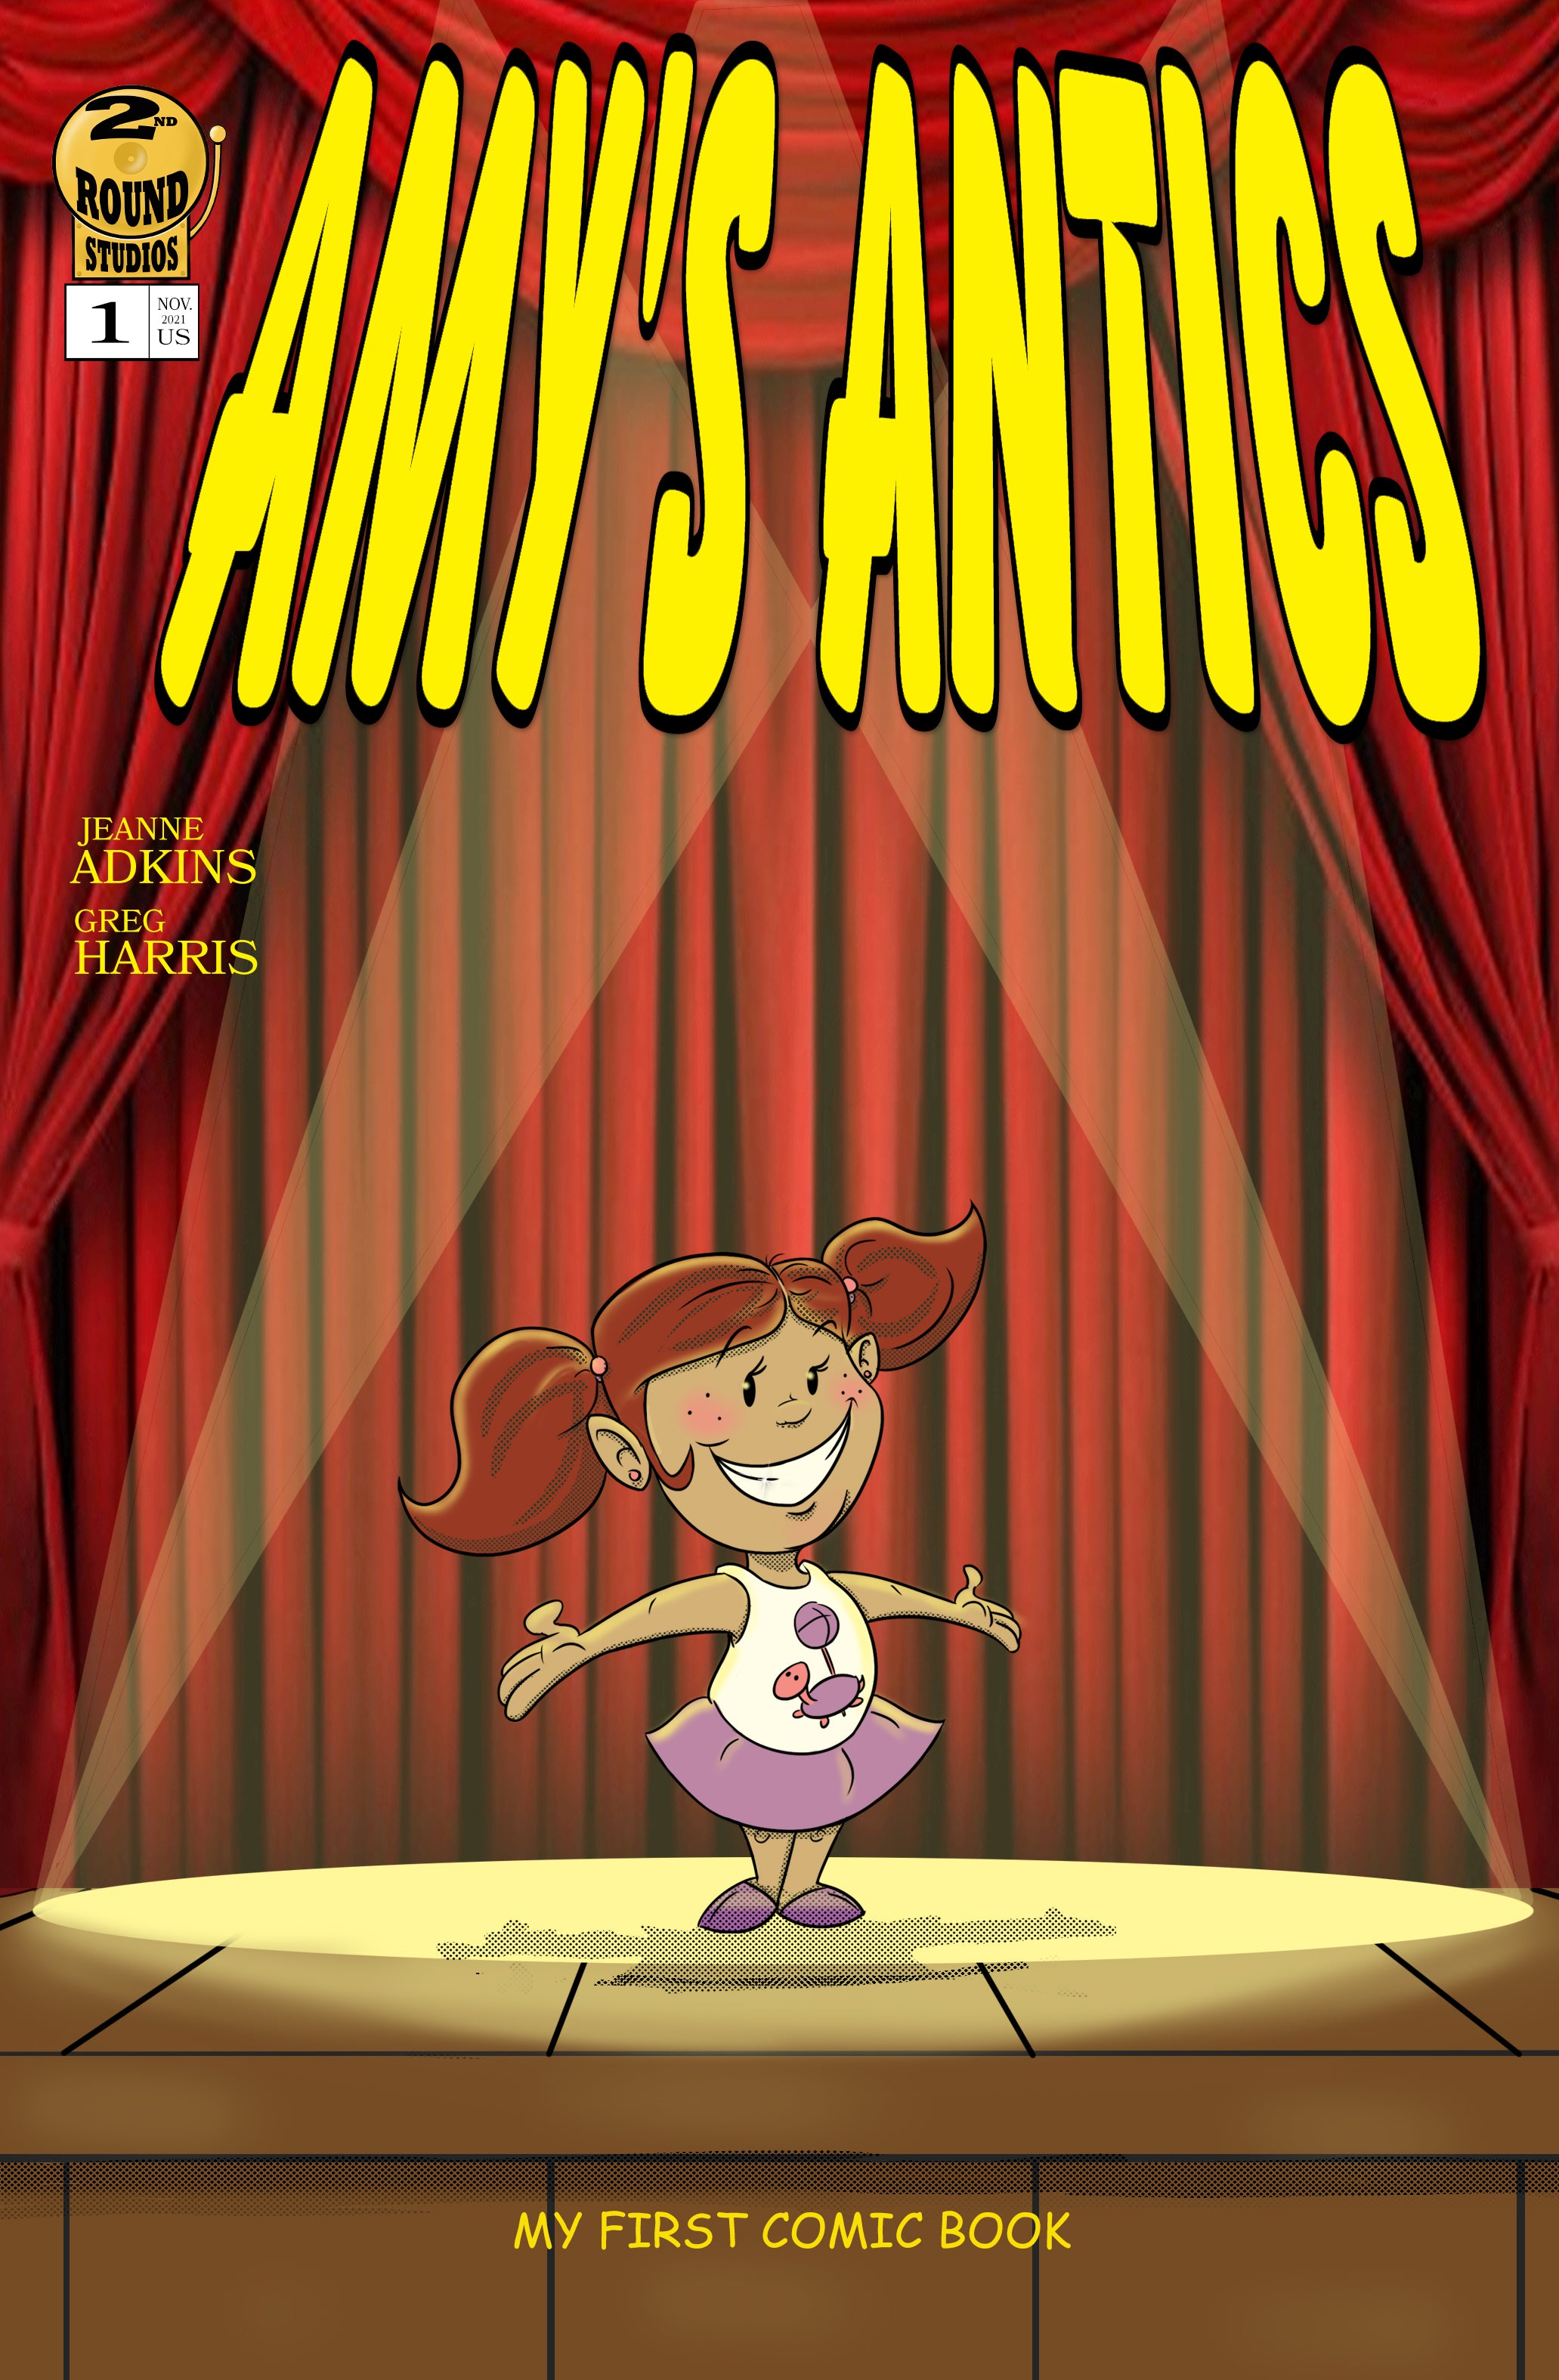 Amy's Antics comic book cover featuring image of precocious 4-year-old girl named Amy